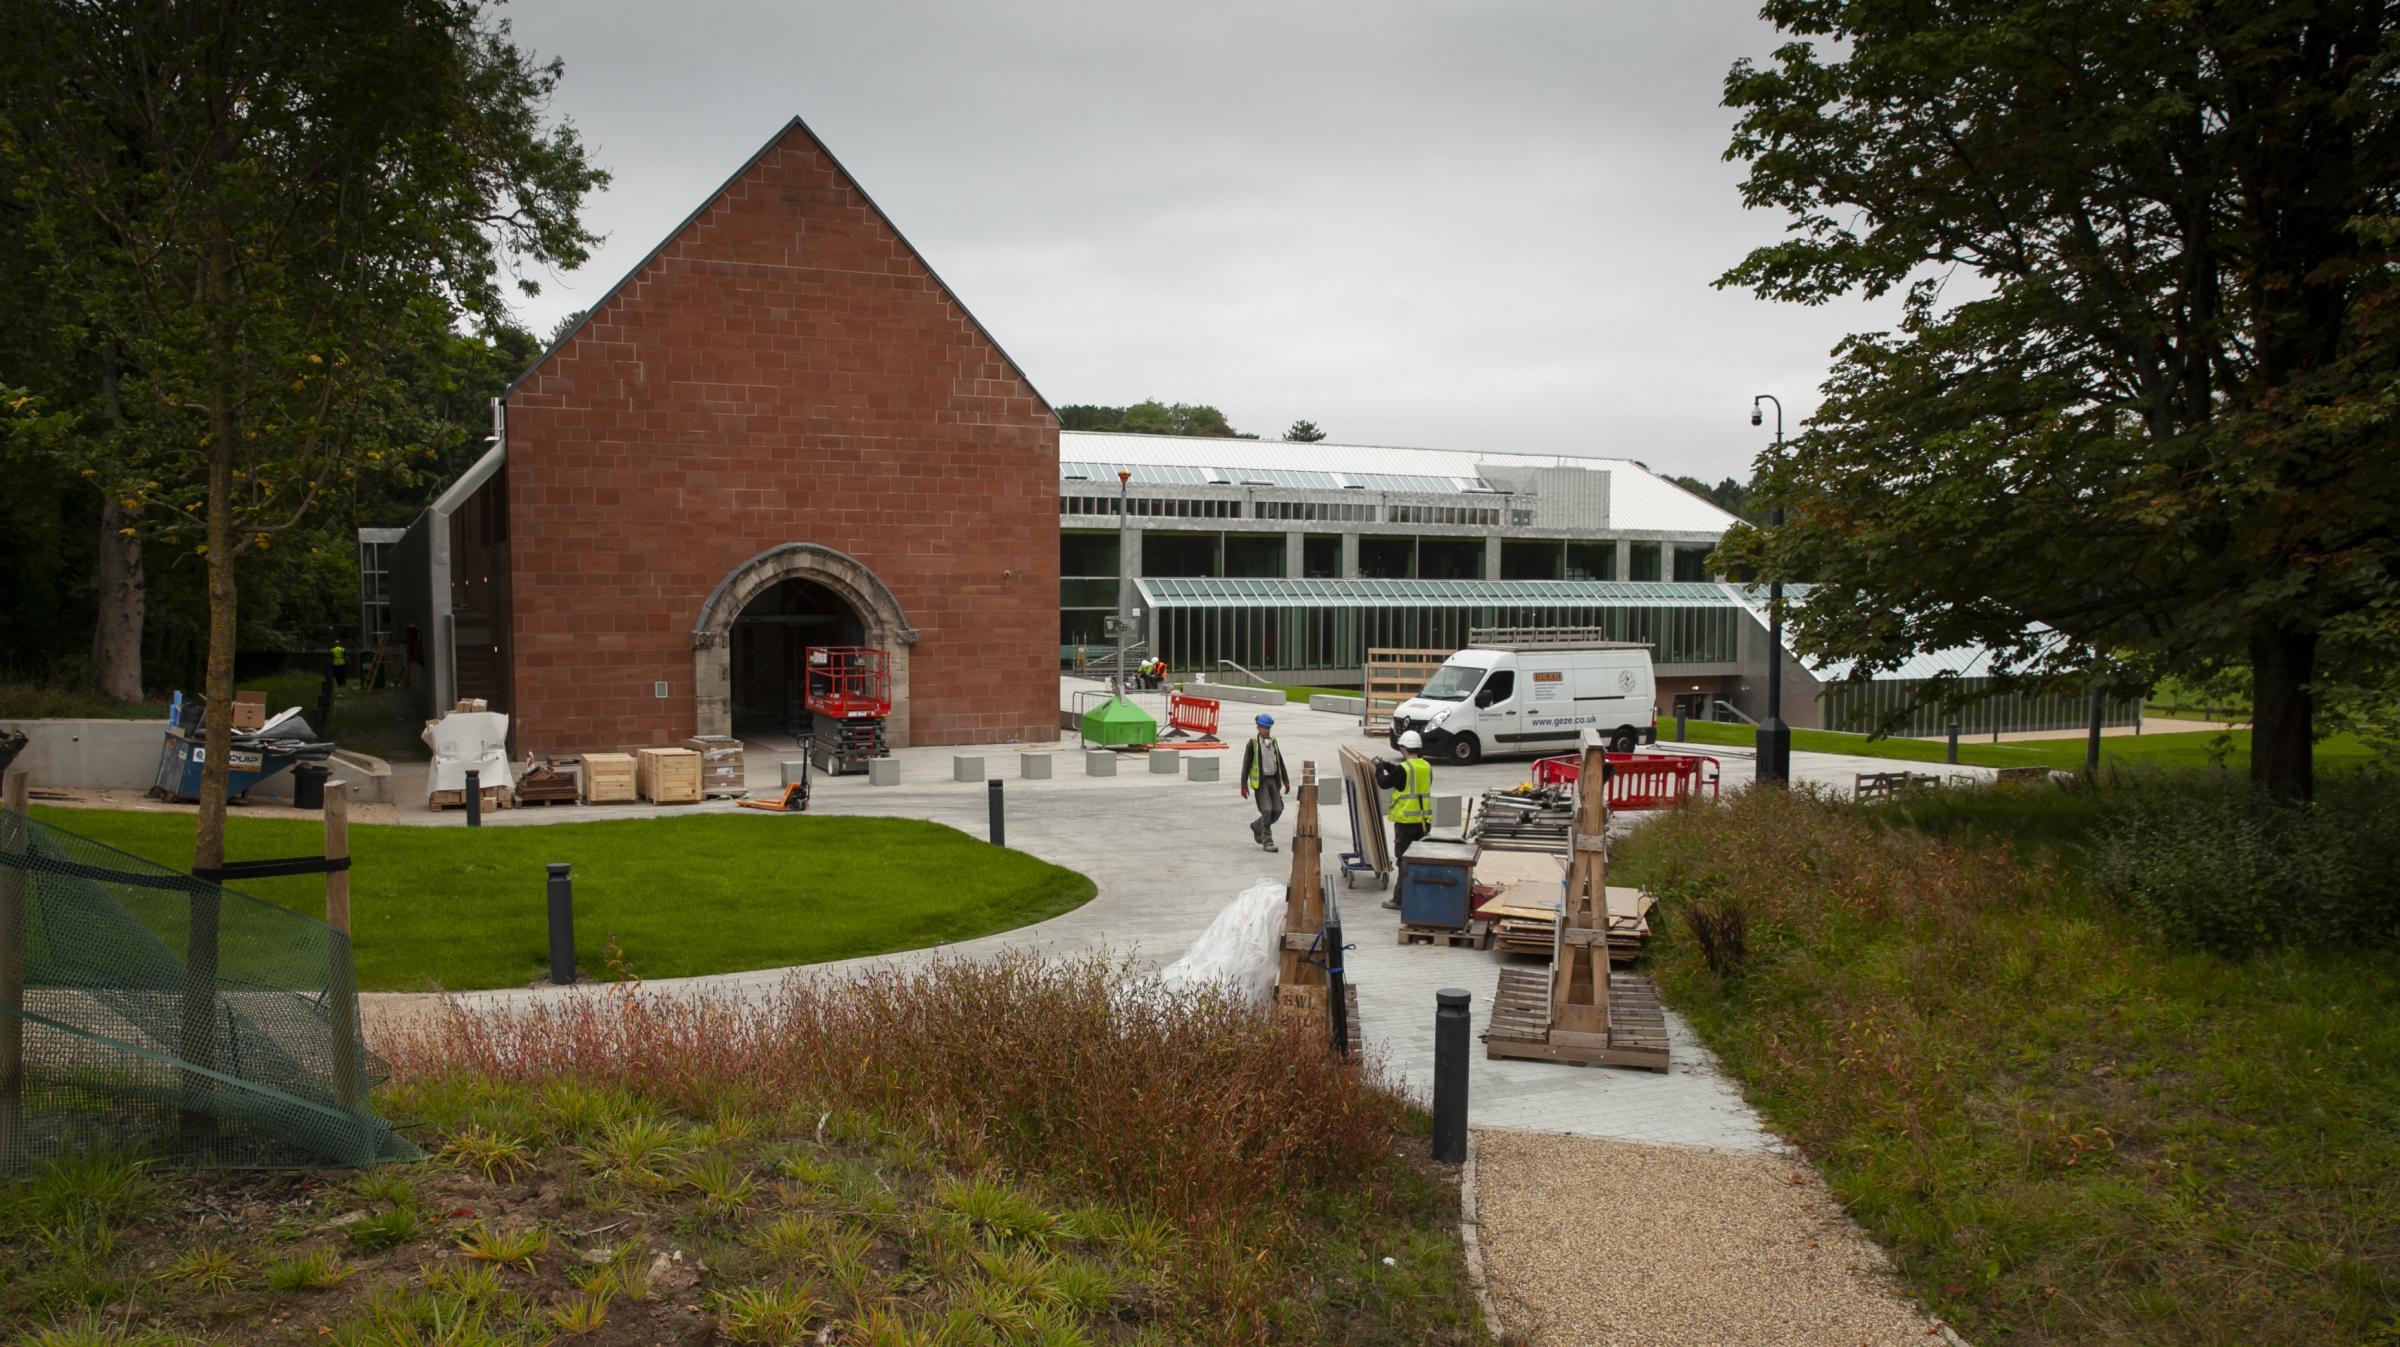 Work in progress of the refurbishment of the Burrell collection in Pollok Country Park, Glasgow. Photograph by Colin Mearns.